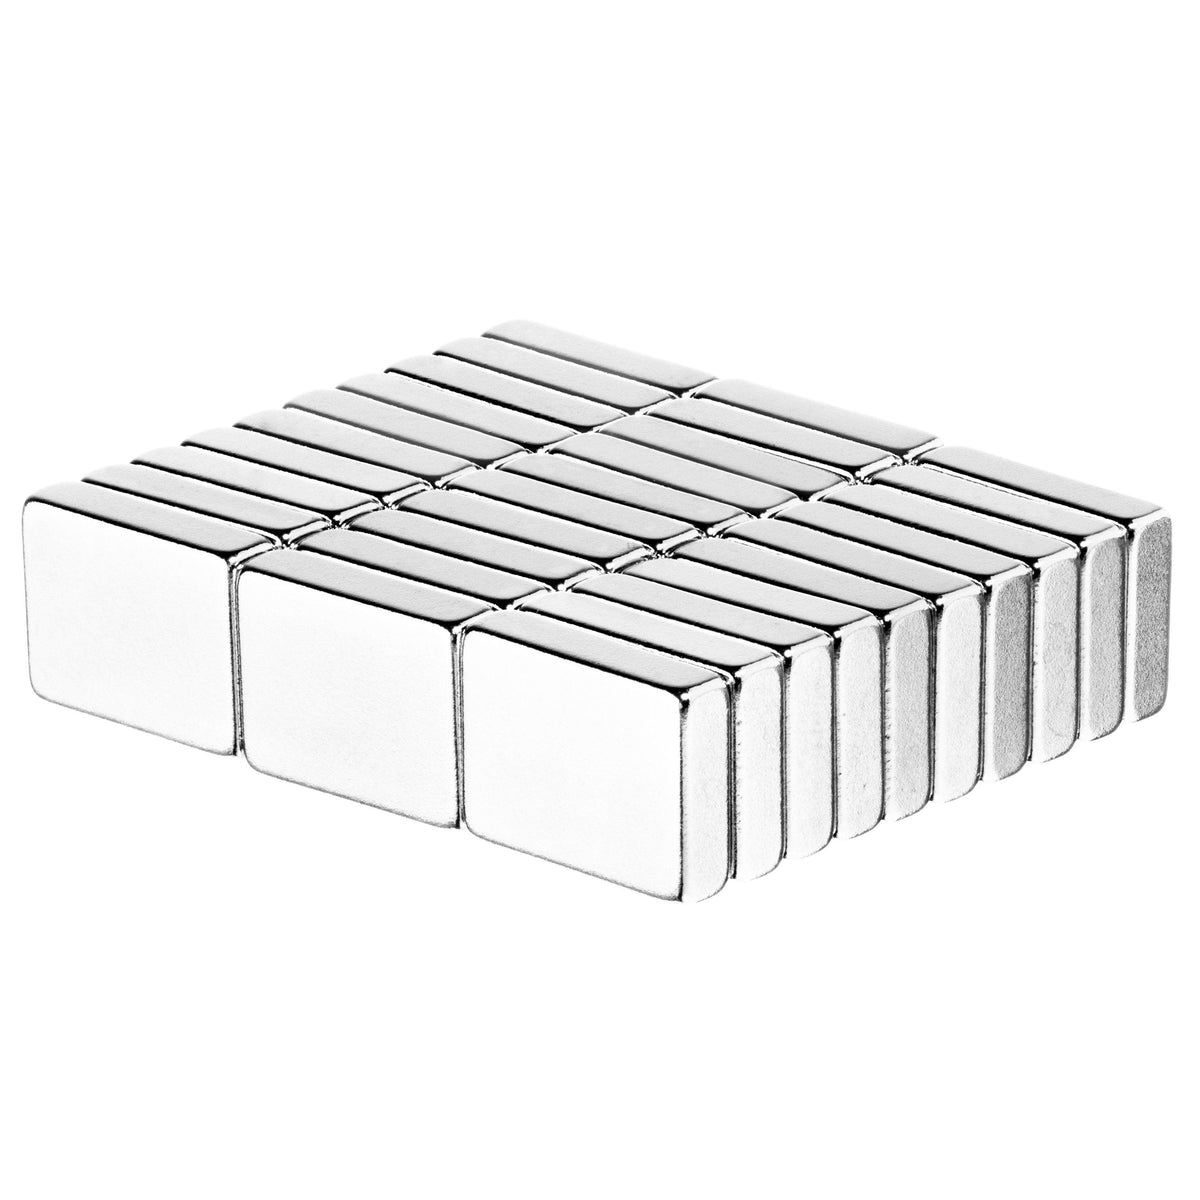 Discounted Neodymium Magnets - Strong Rare Earth Magnet Sale